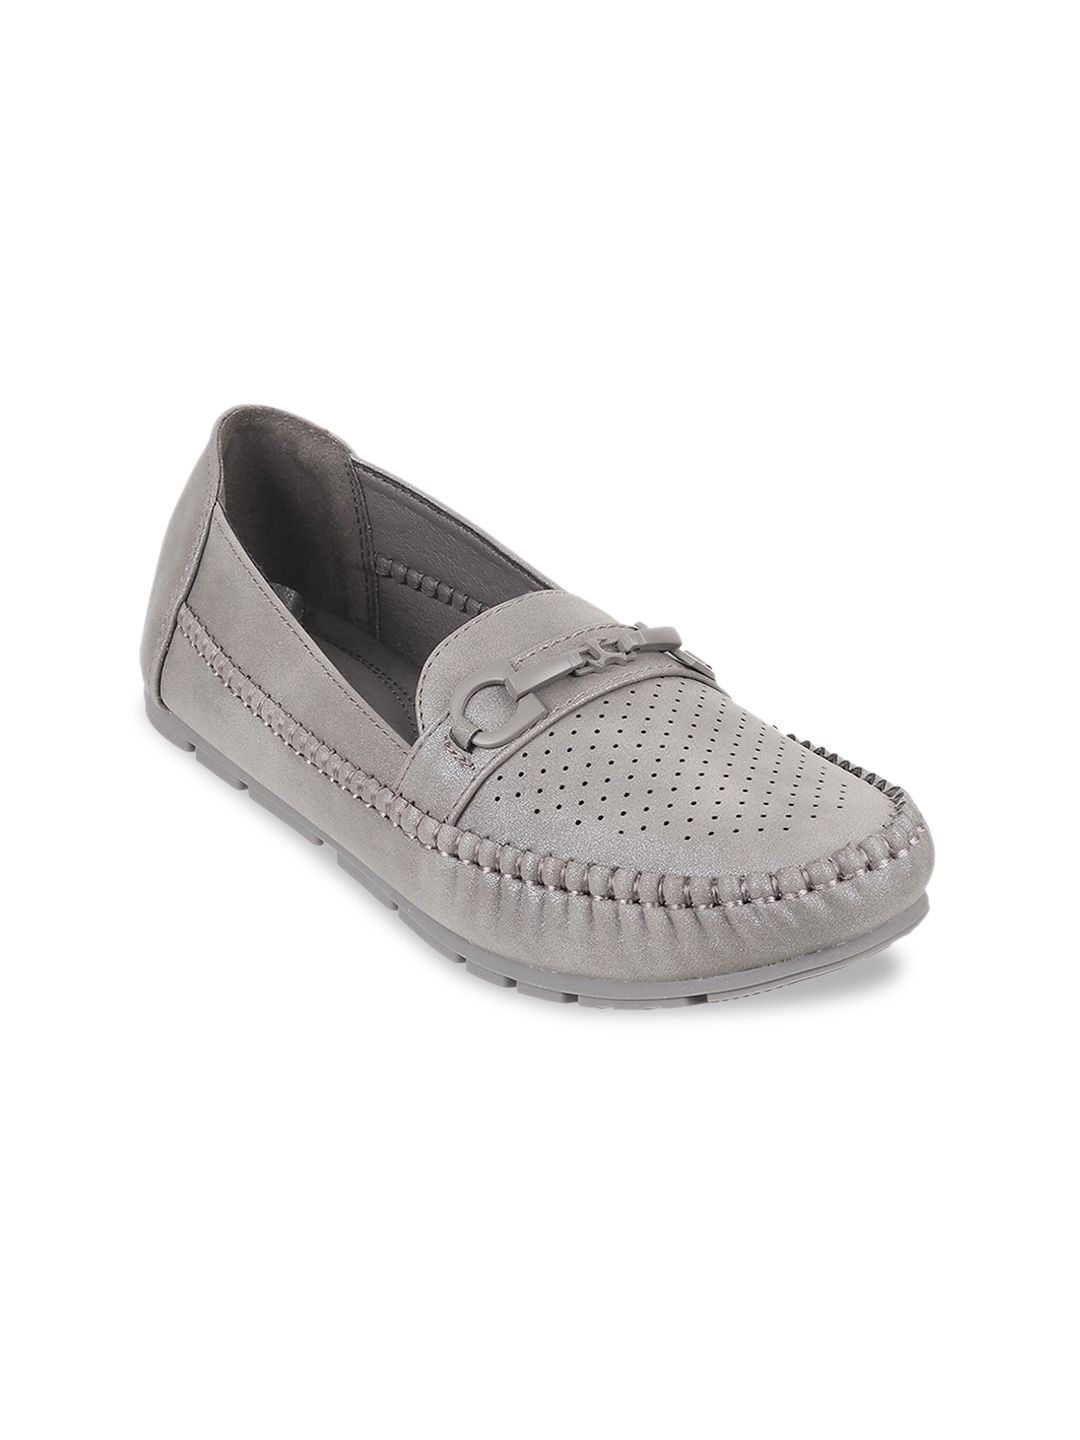 Mochi Women Perforationed Loafers Price in India